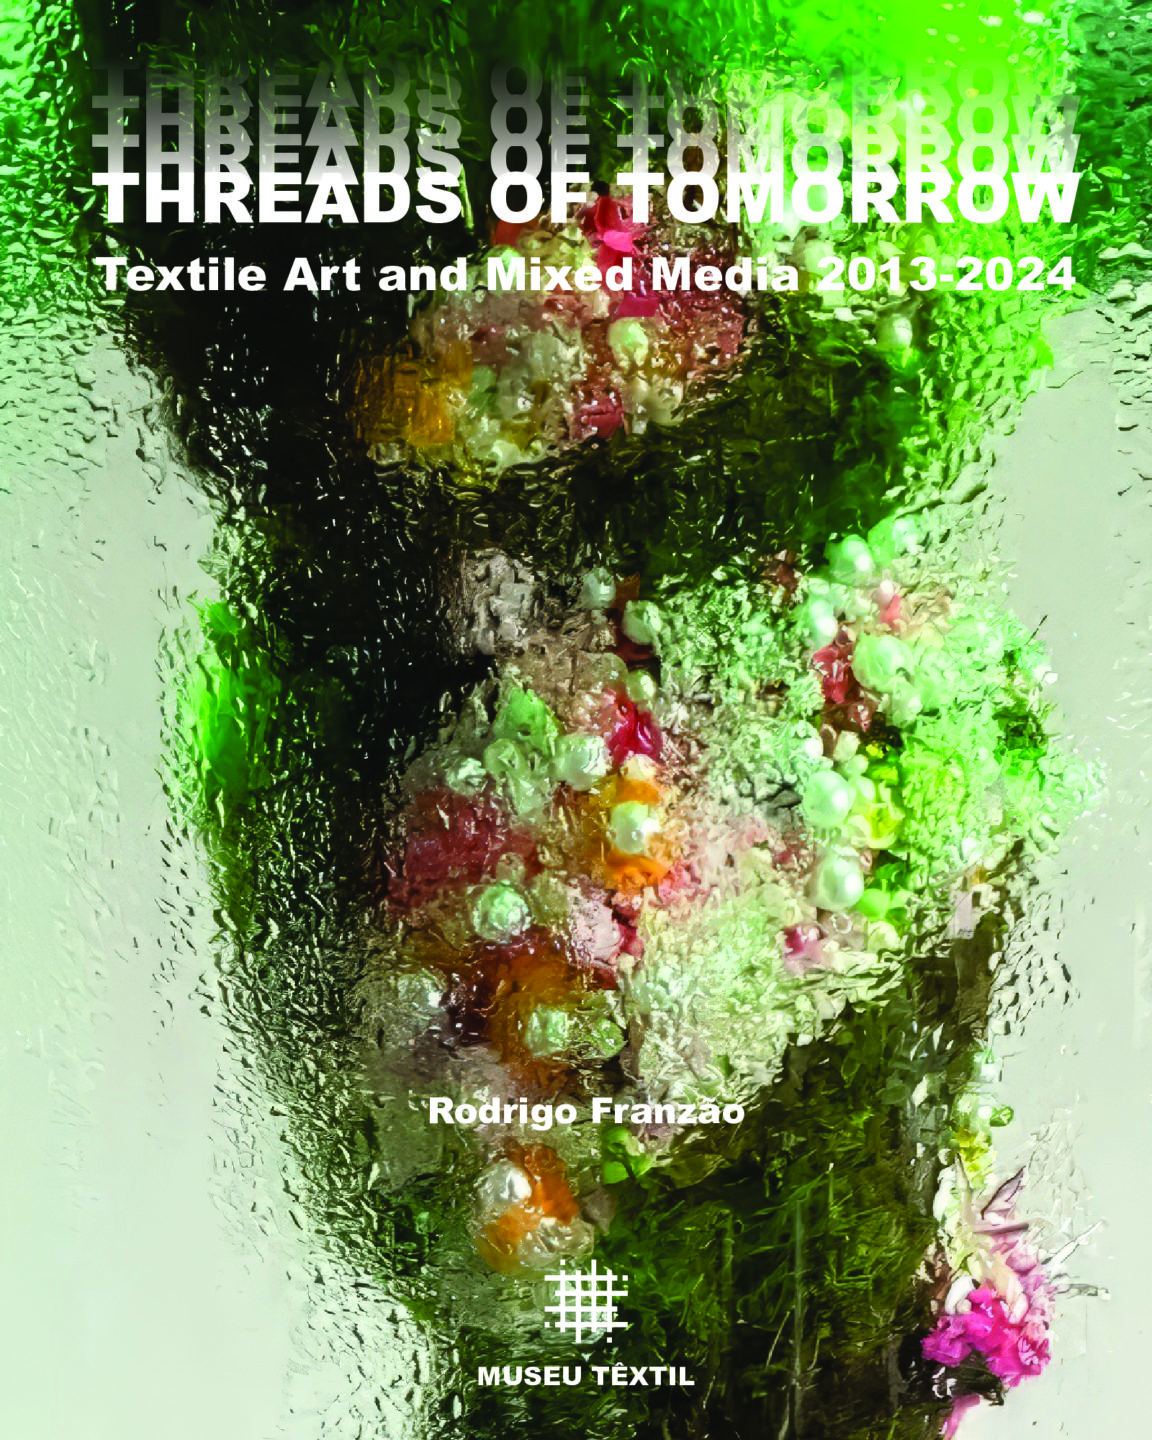 Catalogue THREADS OF TOMORROW MUSEUTEXTIL - THREADS OF TOMORROW - Quimper Brest